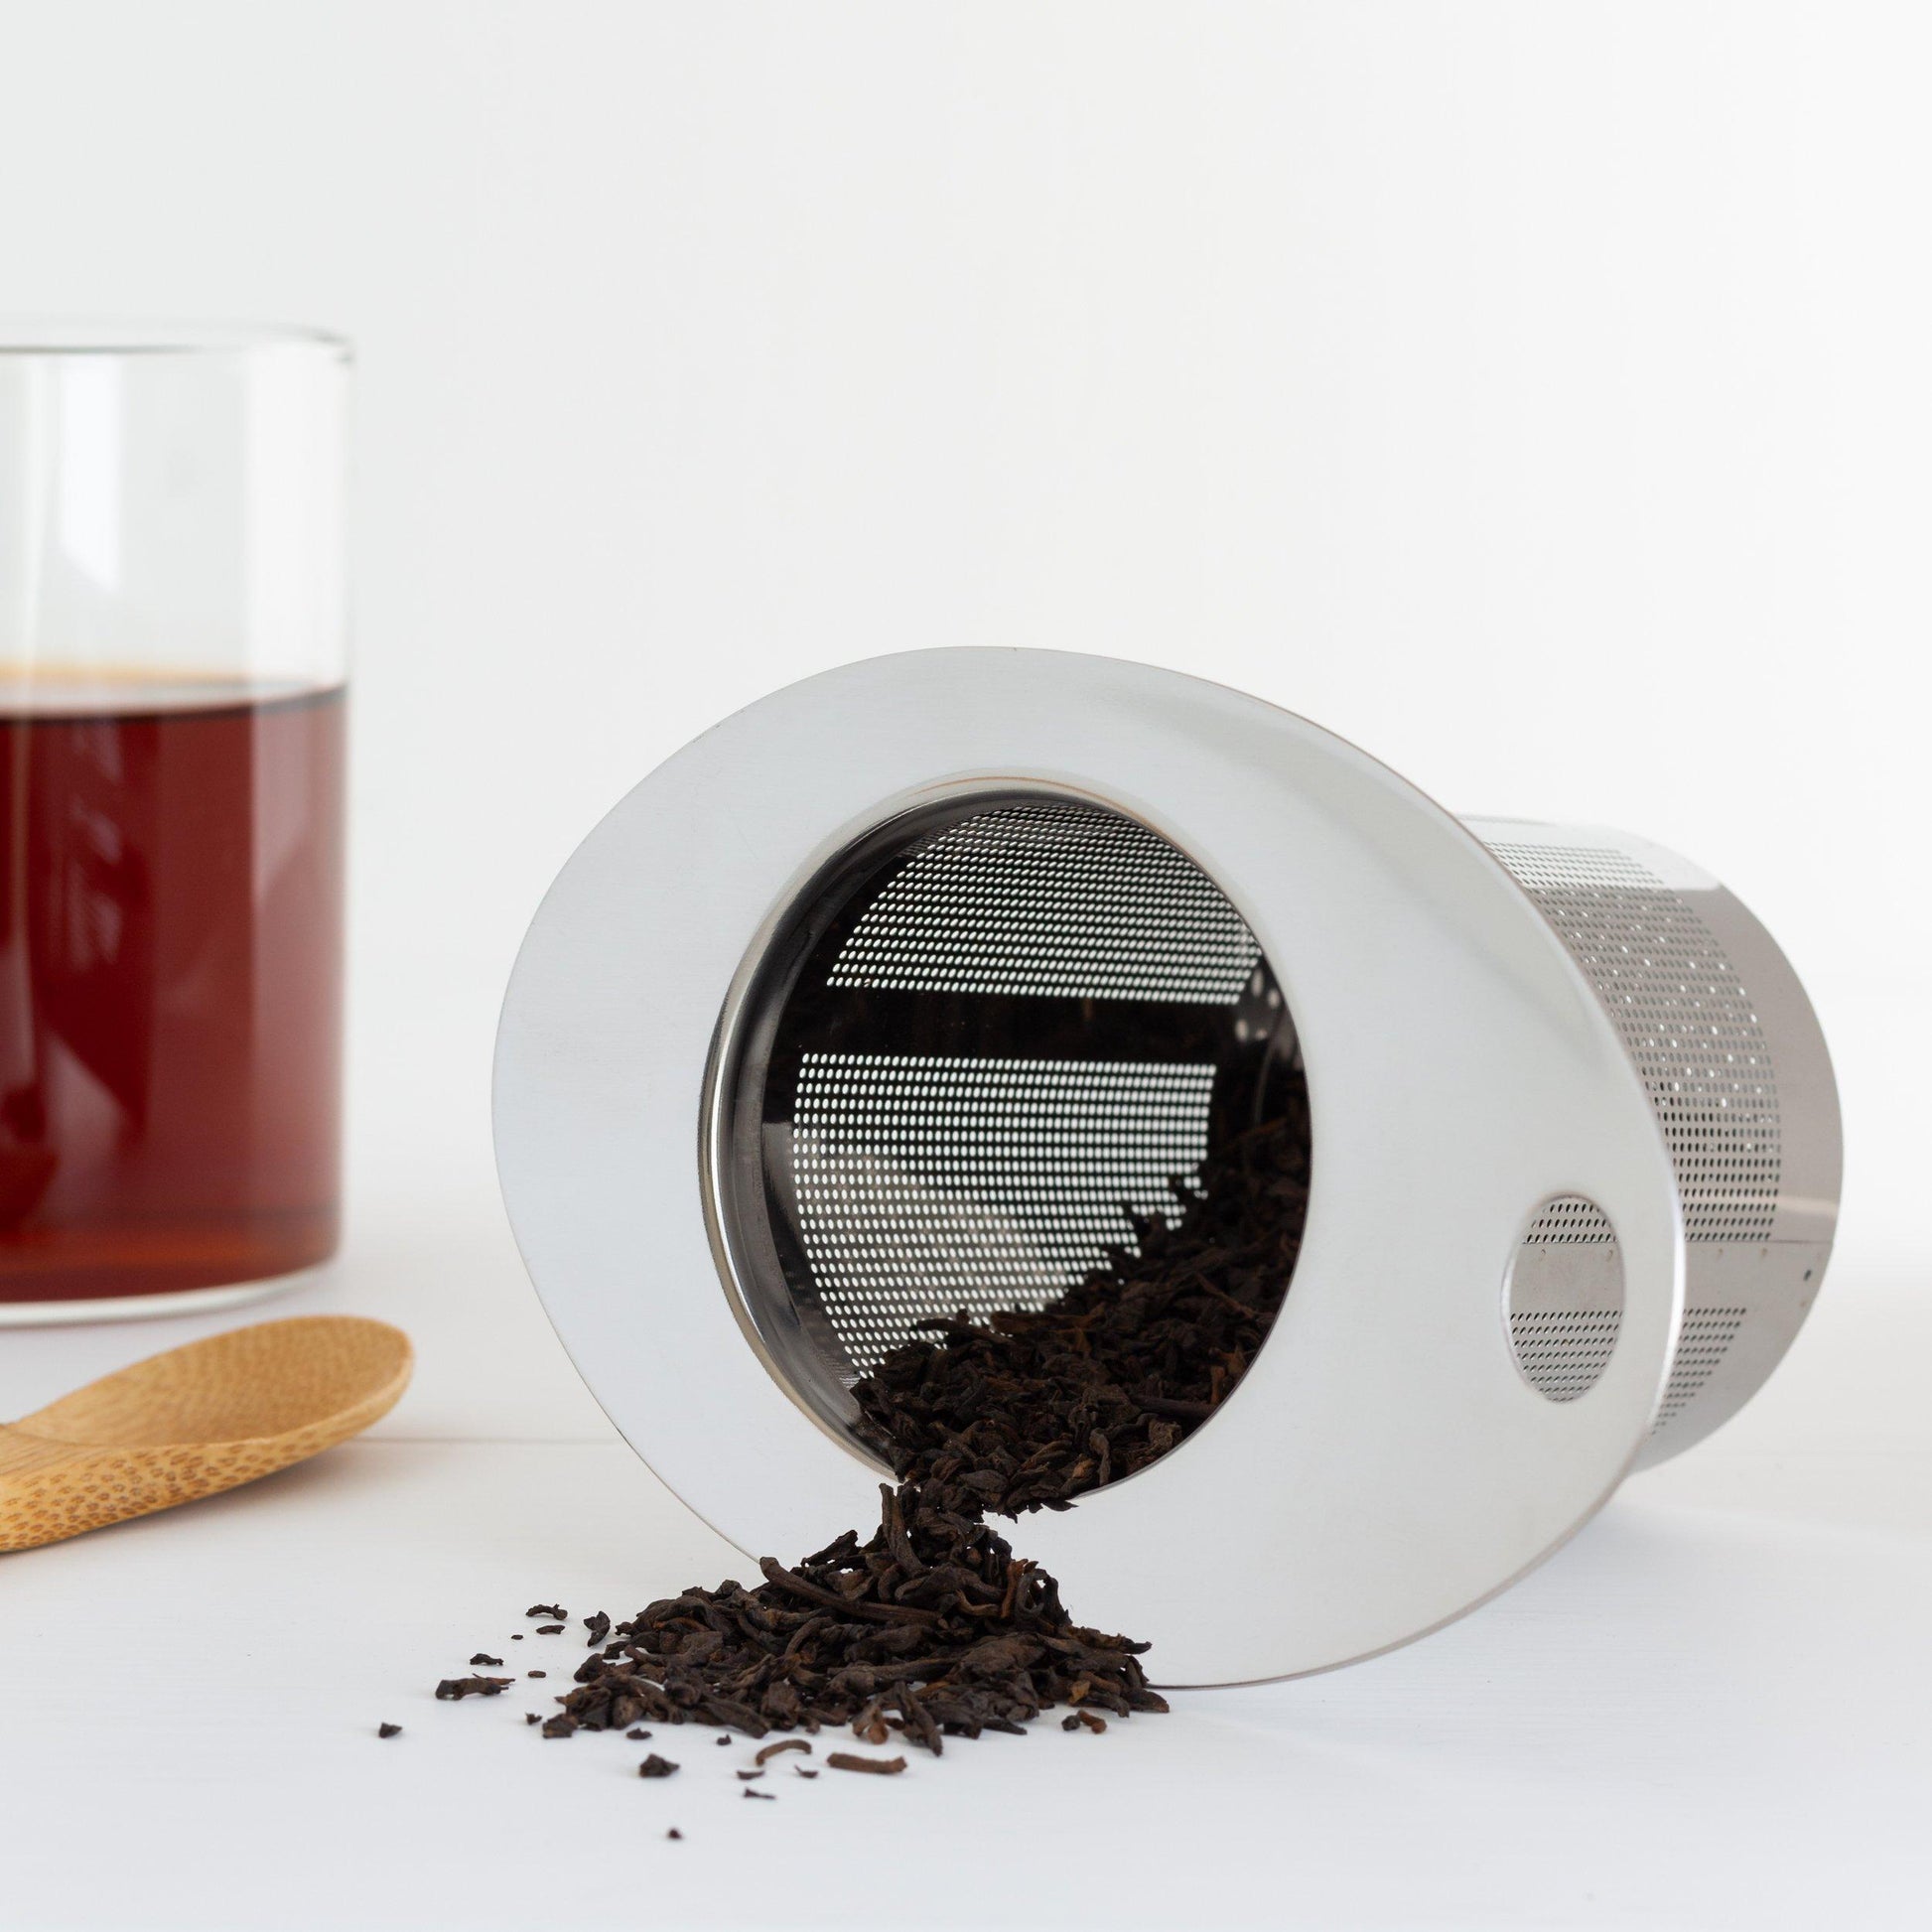 Stainless Steel Tea Infuser Basket (lying on its side with tea leaves spilling out)